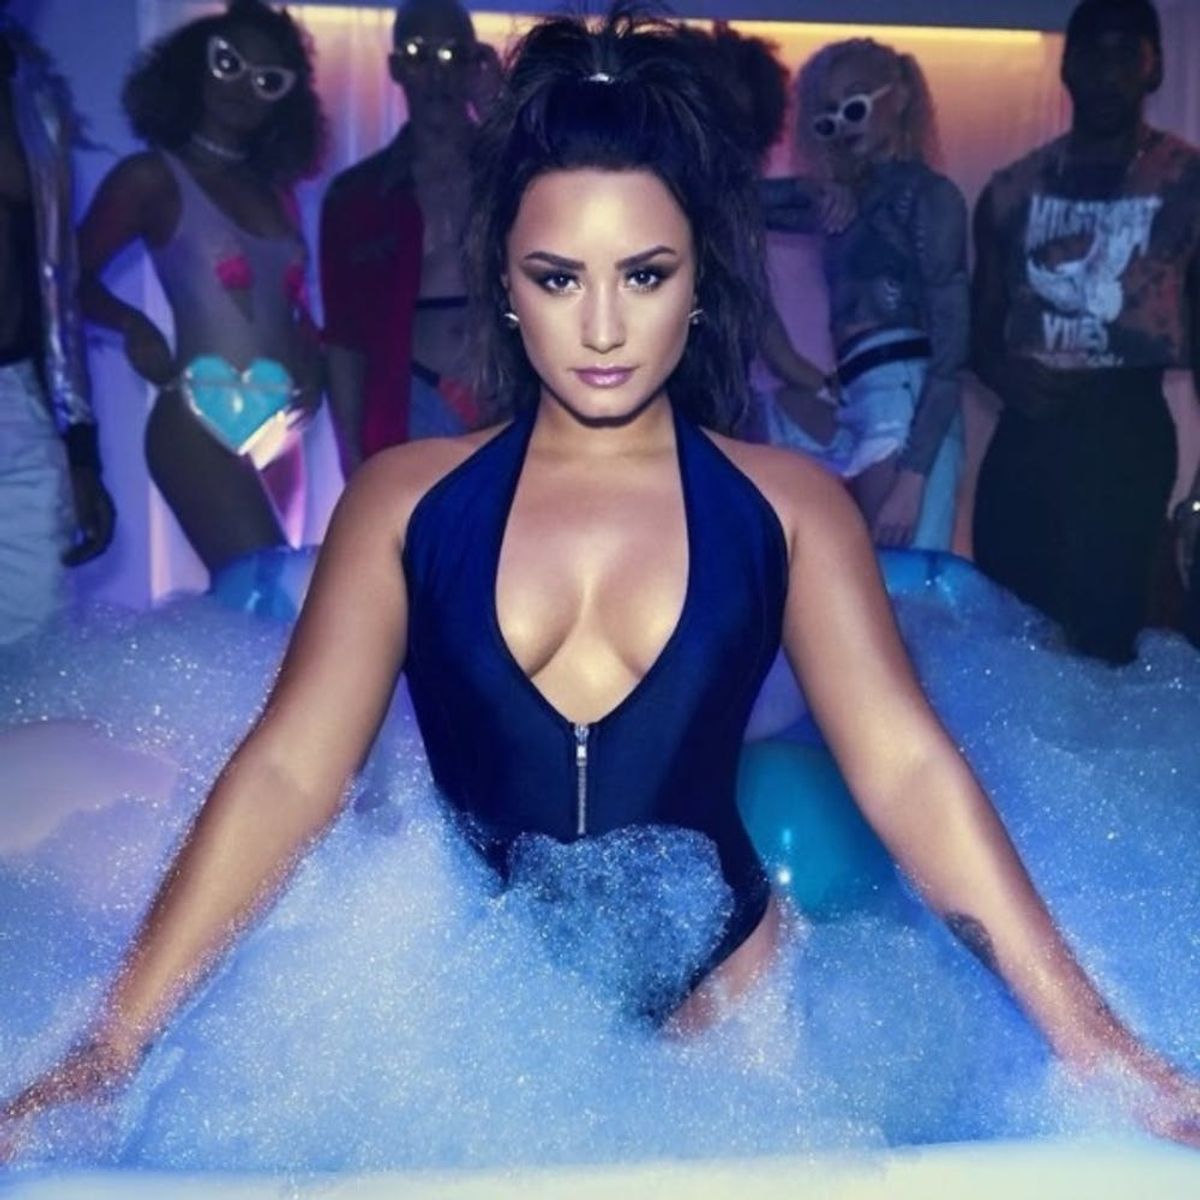 Demi Lovato’s New Song, “Sorry Not Sorry,” Comes Out at Midnight